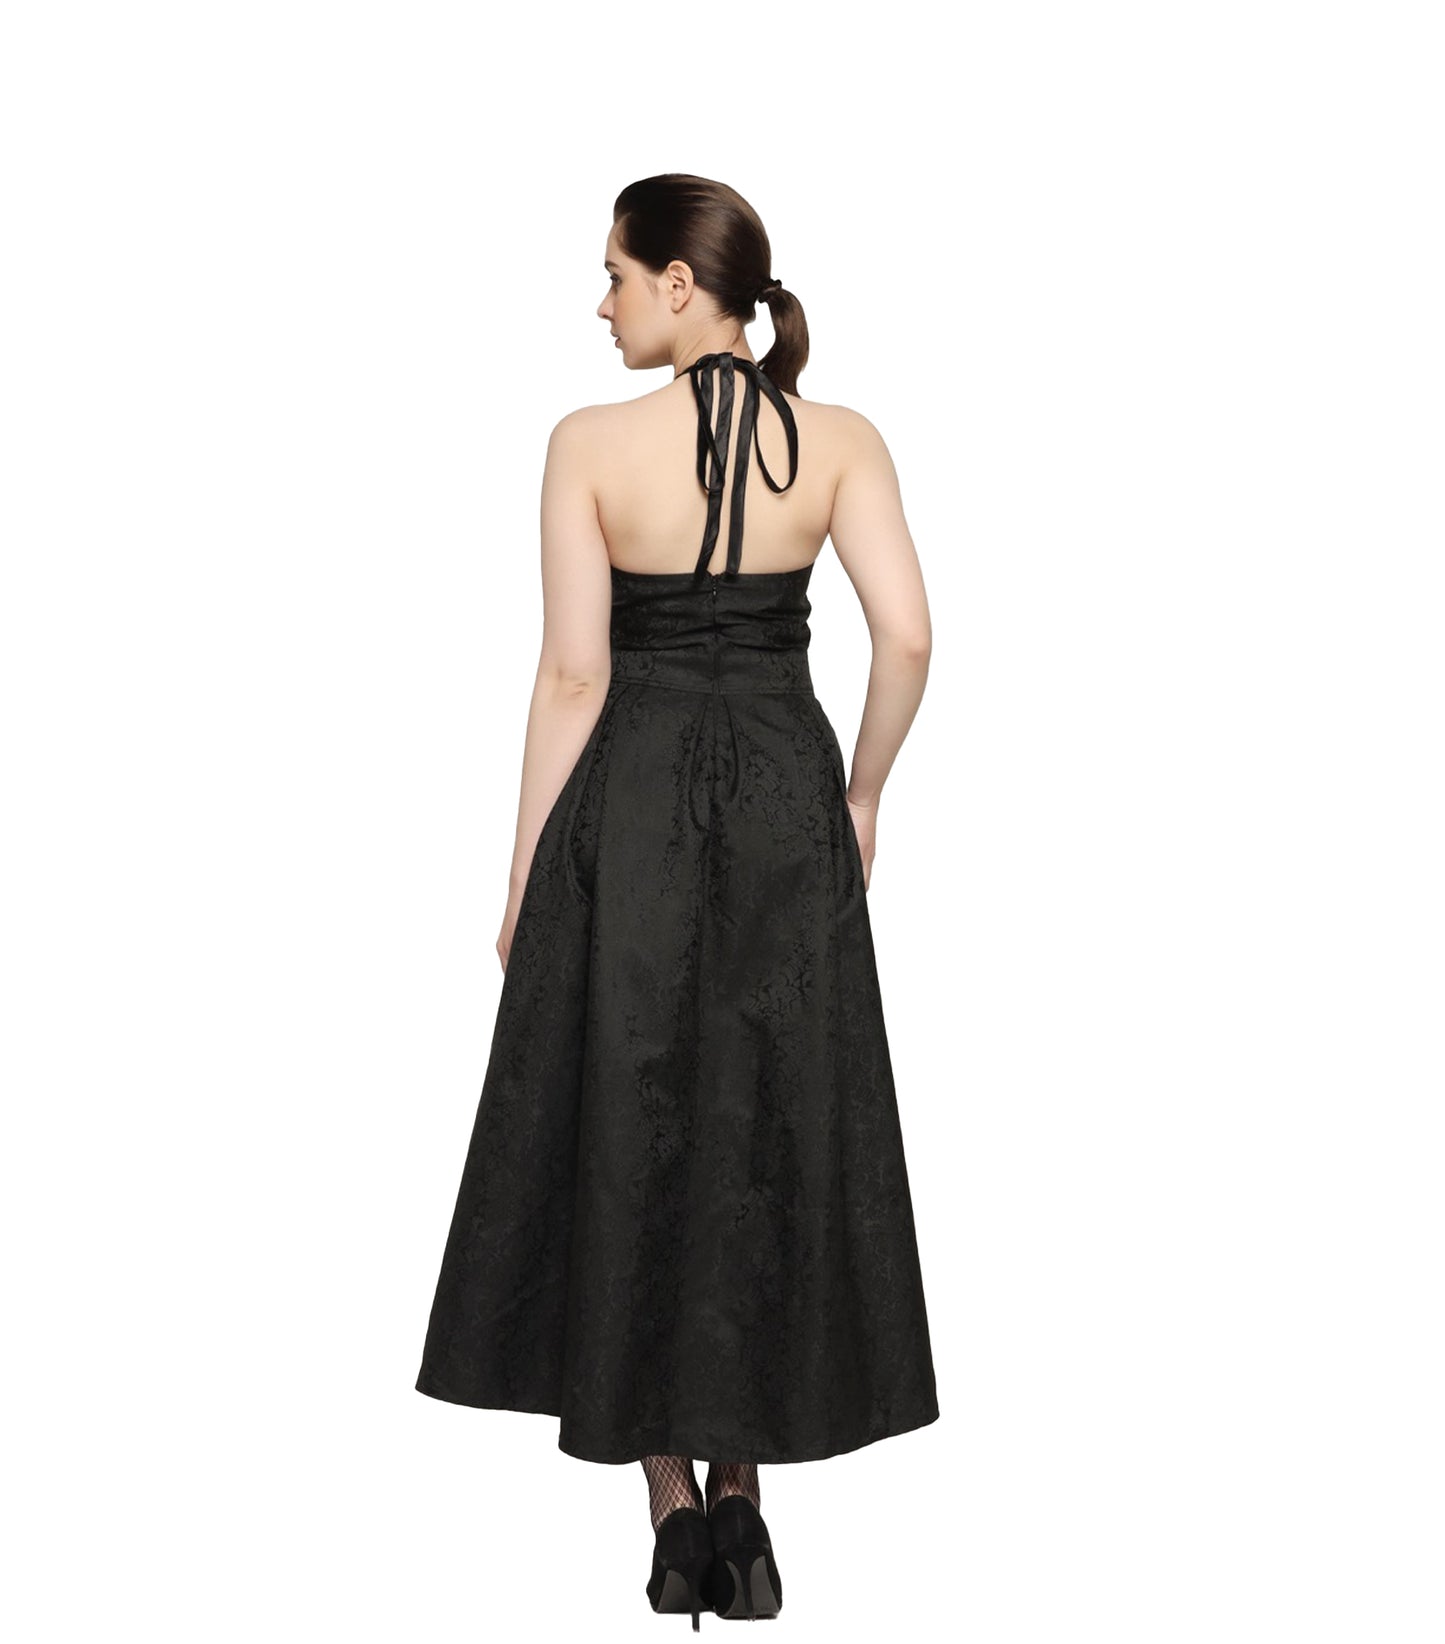 Bite Me Embroidered Ladies Gothic Dress